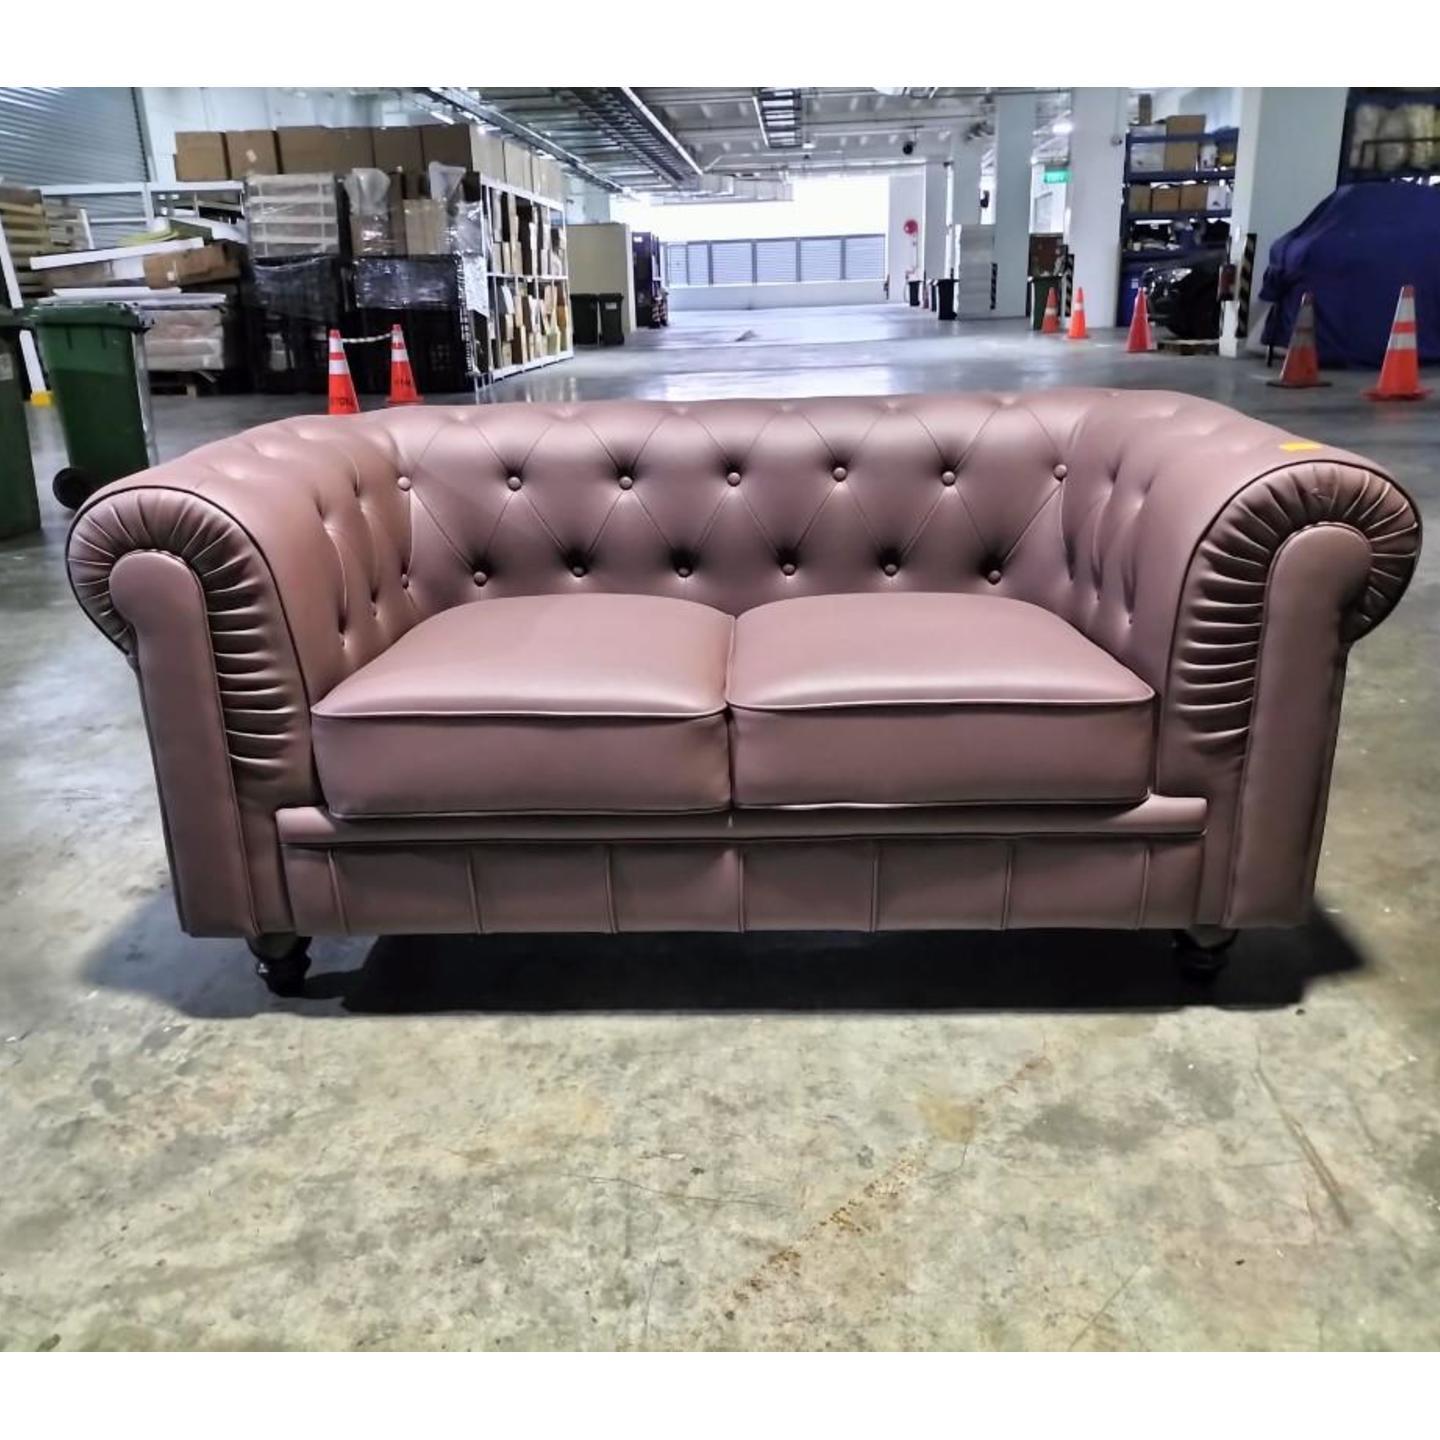 SALVADO UNO 2 Seater Chesterfield Sofa In BROWN PU